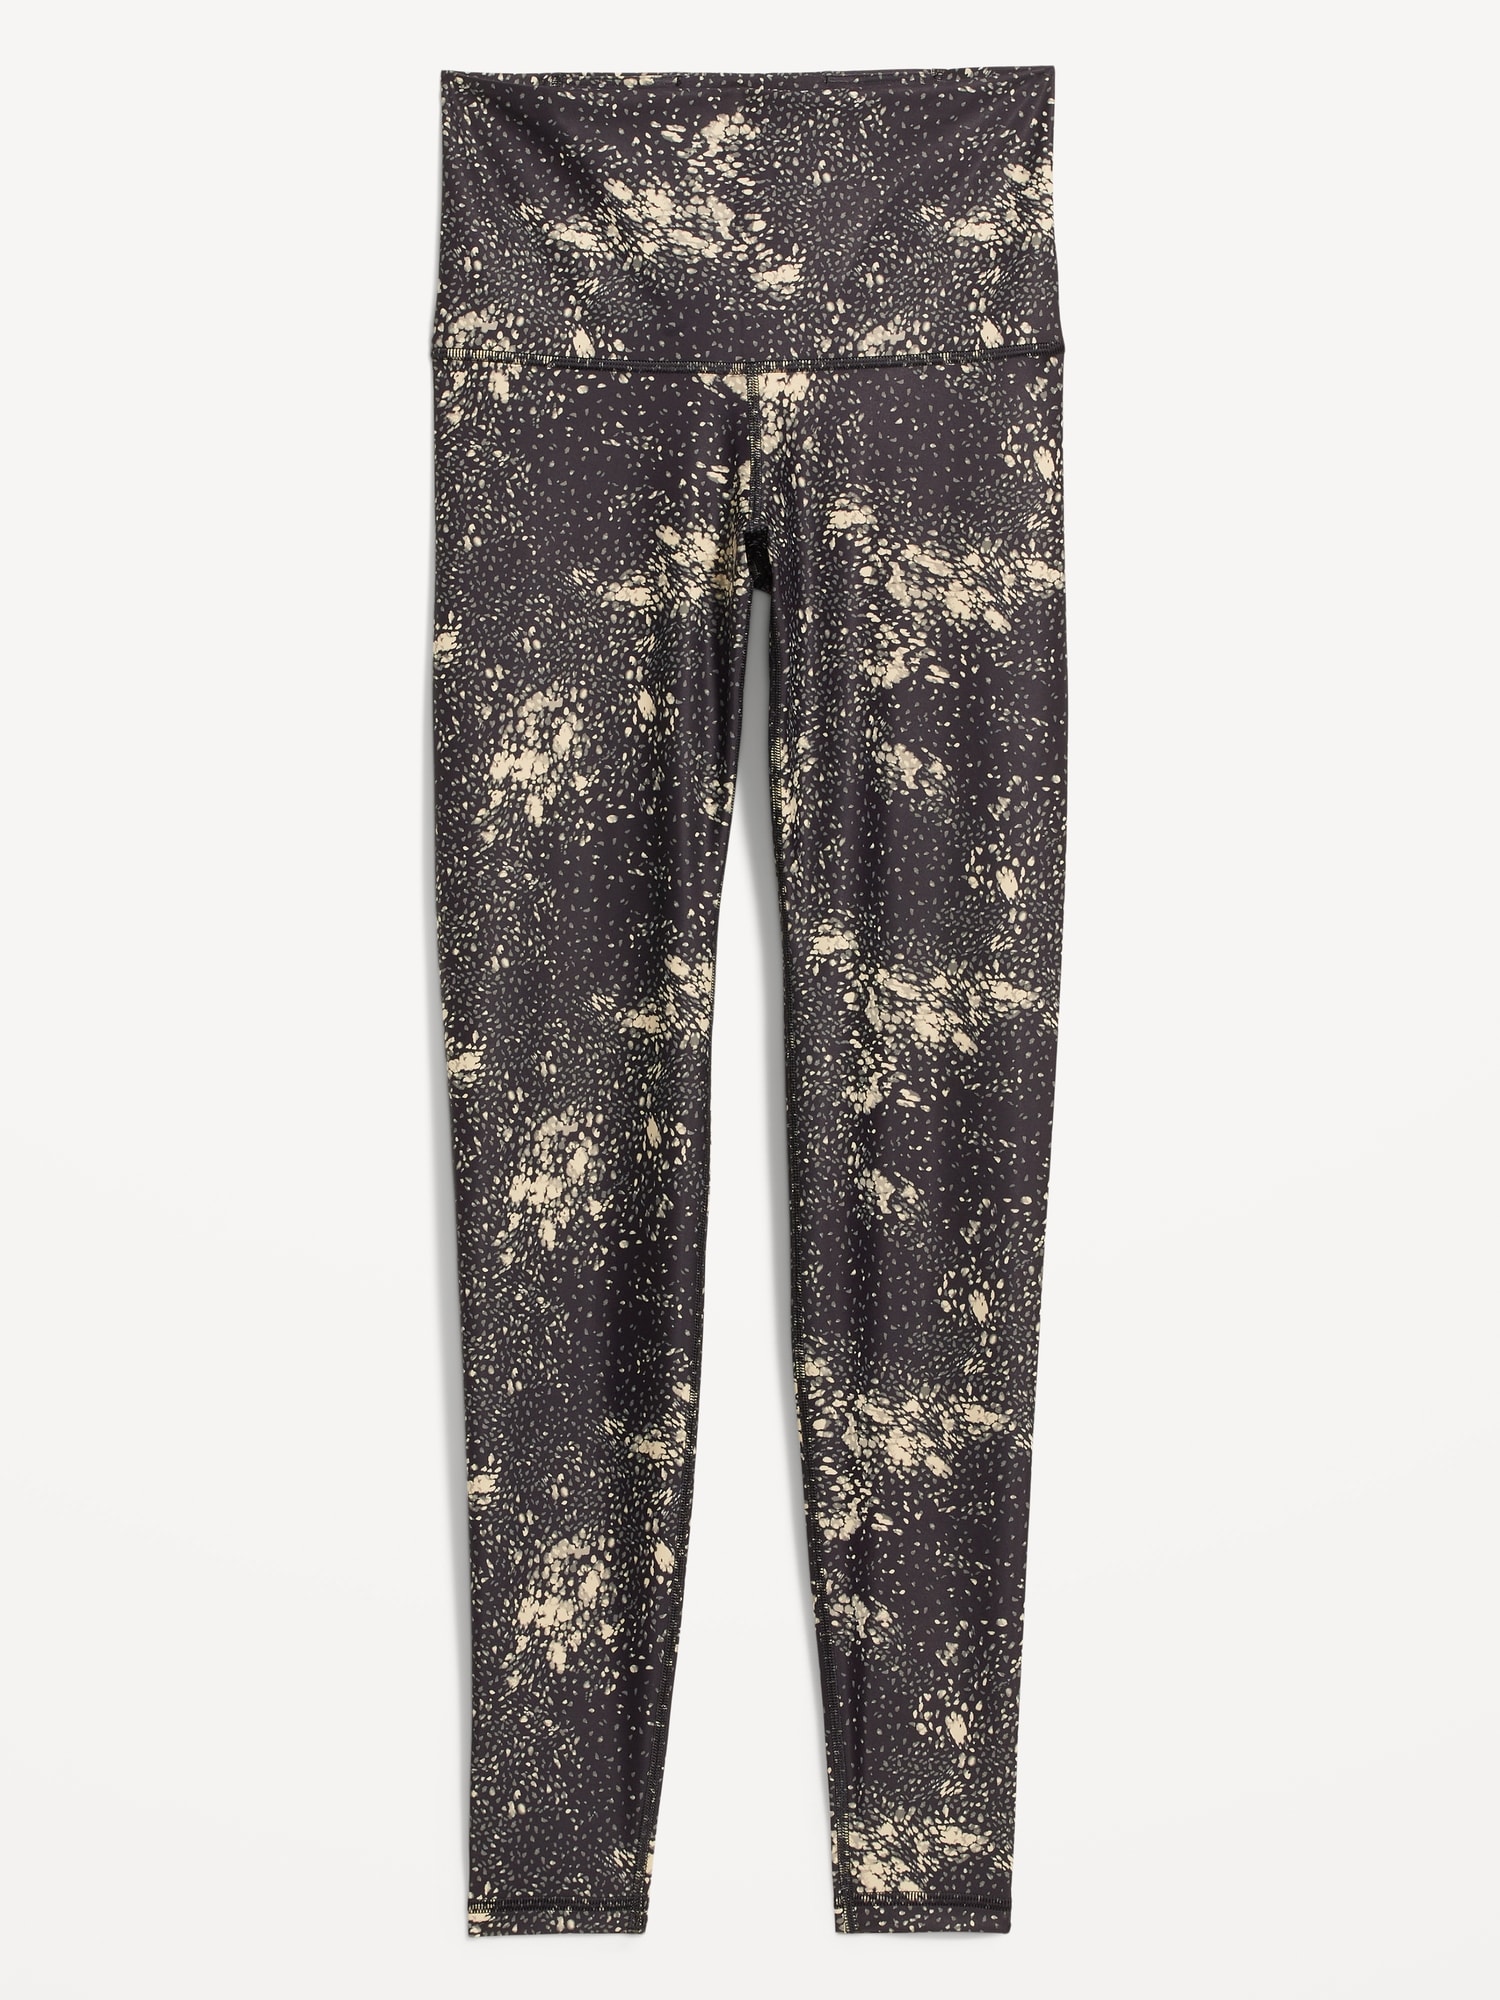 Extra High-Waisted PowerSoft Leggings for Women | Old Navy